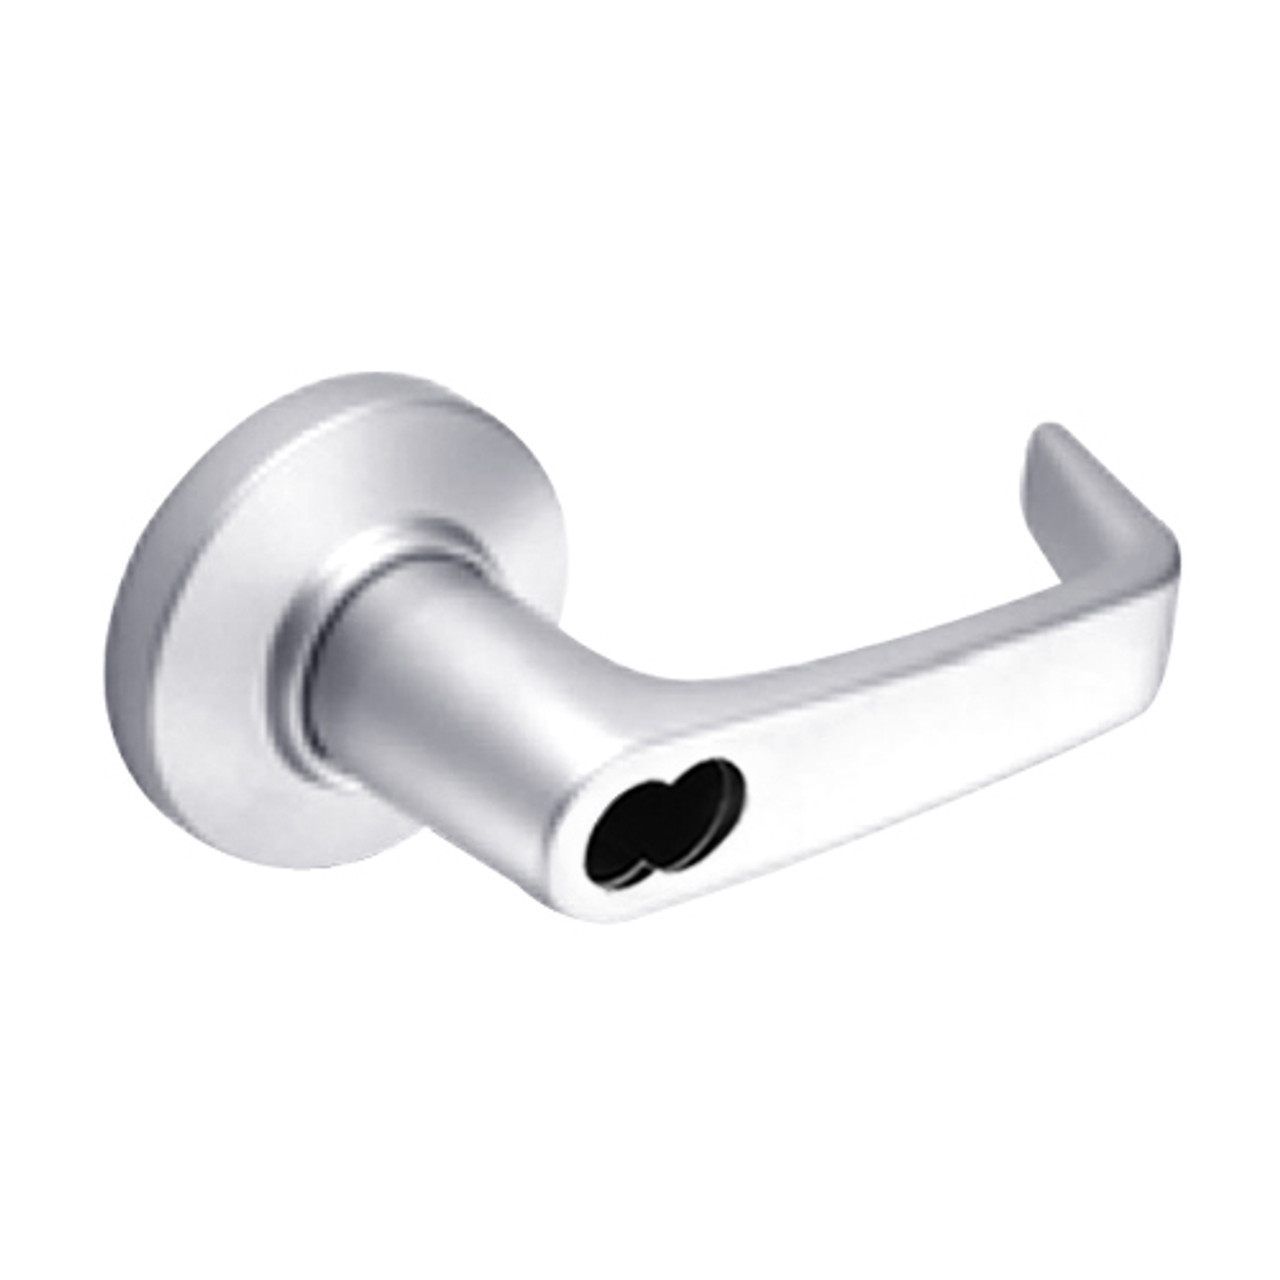 9K57E15CS3625LM Best 9K Series Service Station Cylindrical Lever Locks with Contour Angle with Return Lever Design Accept 7 Pin Best Core in Bright Chrome